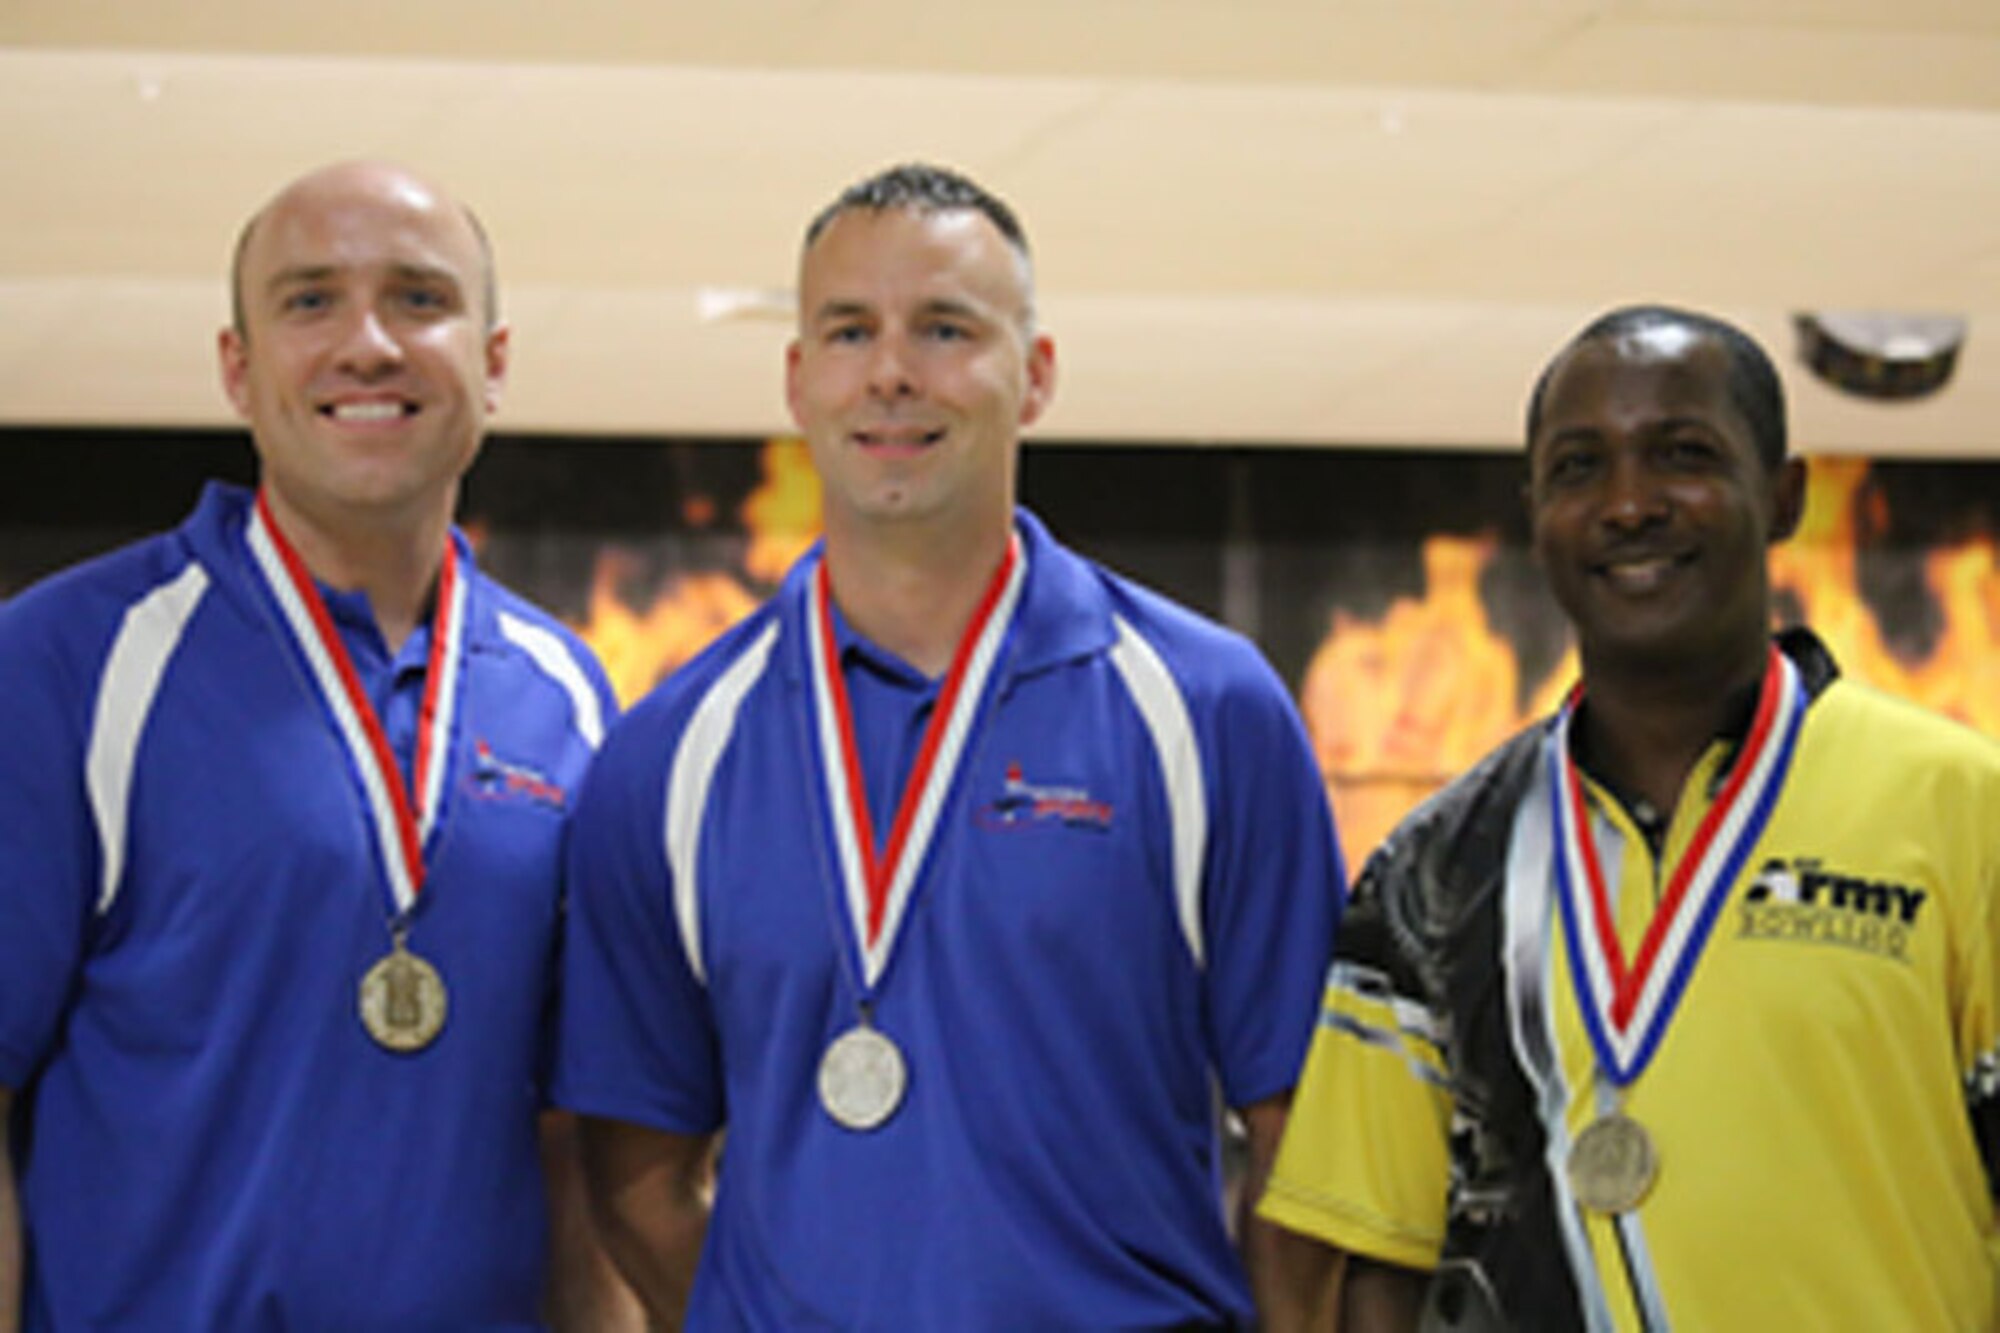 Air Force Staff Sgt. James McTaggart of Nellis AFB, Nevada; Tech. Sgt. Chuck Kropog of Yokota, Air Base, Japan; and Army Sgt. 1st Class Damian Codrington of Fort Hood, Texas take gold, silver and bronze respectively at the Armed Forces Bowling Championship hosted at Marine Corps Base Camp Pendleton, California from 5-8 May at the Leatherneck Lanes.